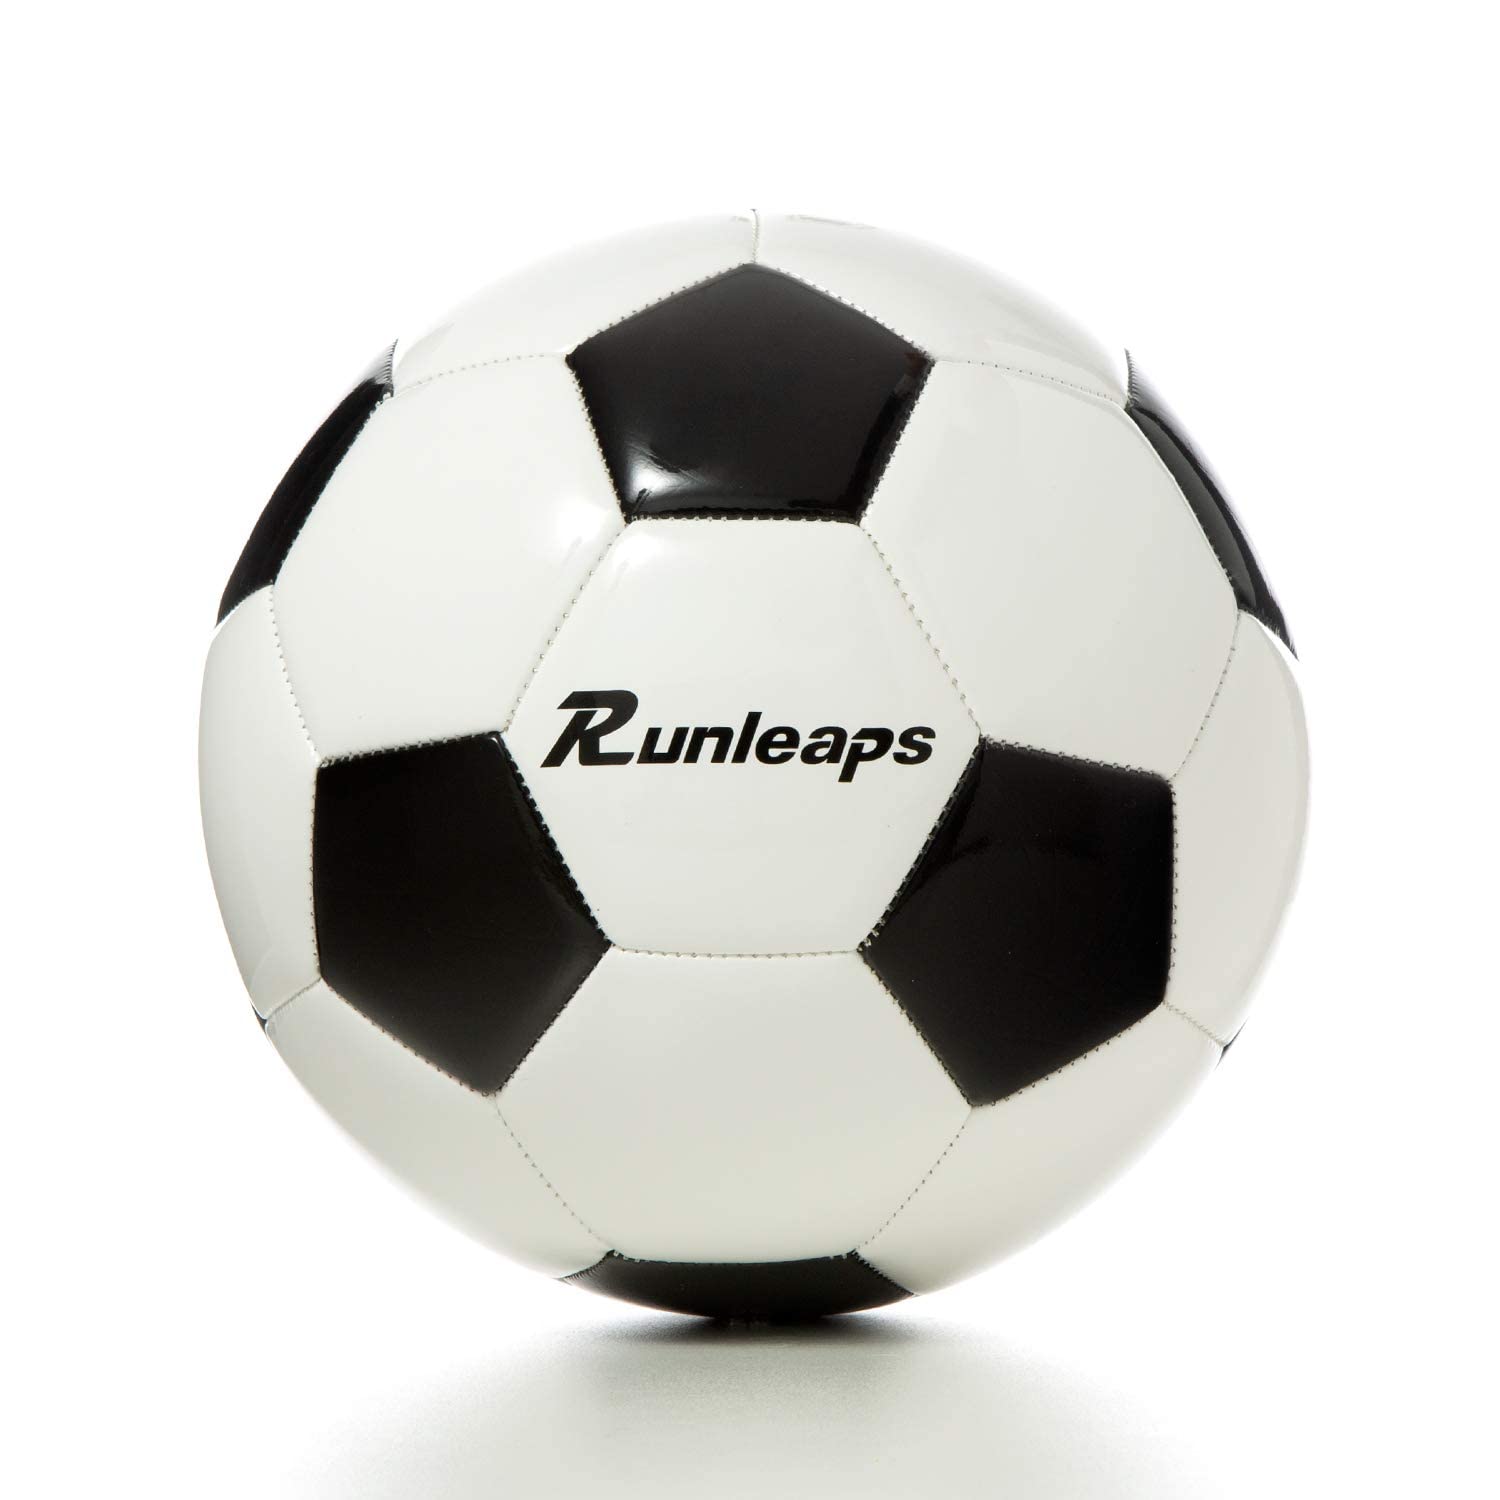 Runleaps Soccer Ball Size 3 For Kids, Ball Toys With Star Pattern Official Size Soccer Balls For Training, Playing, Boys, Girls,